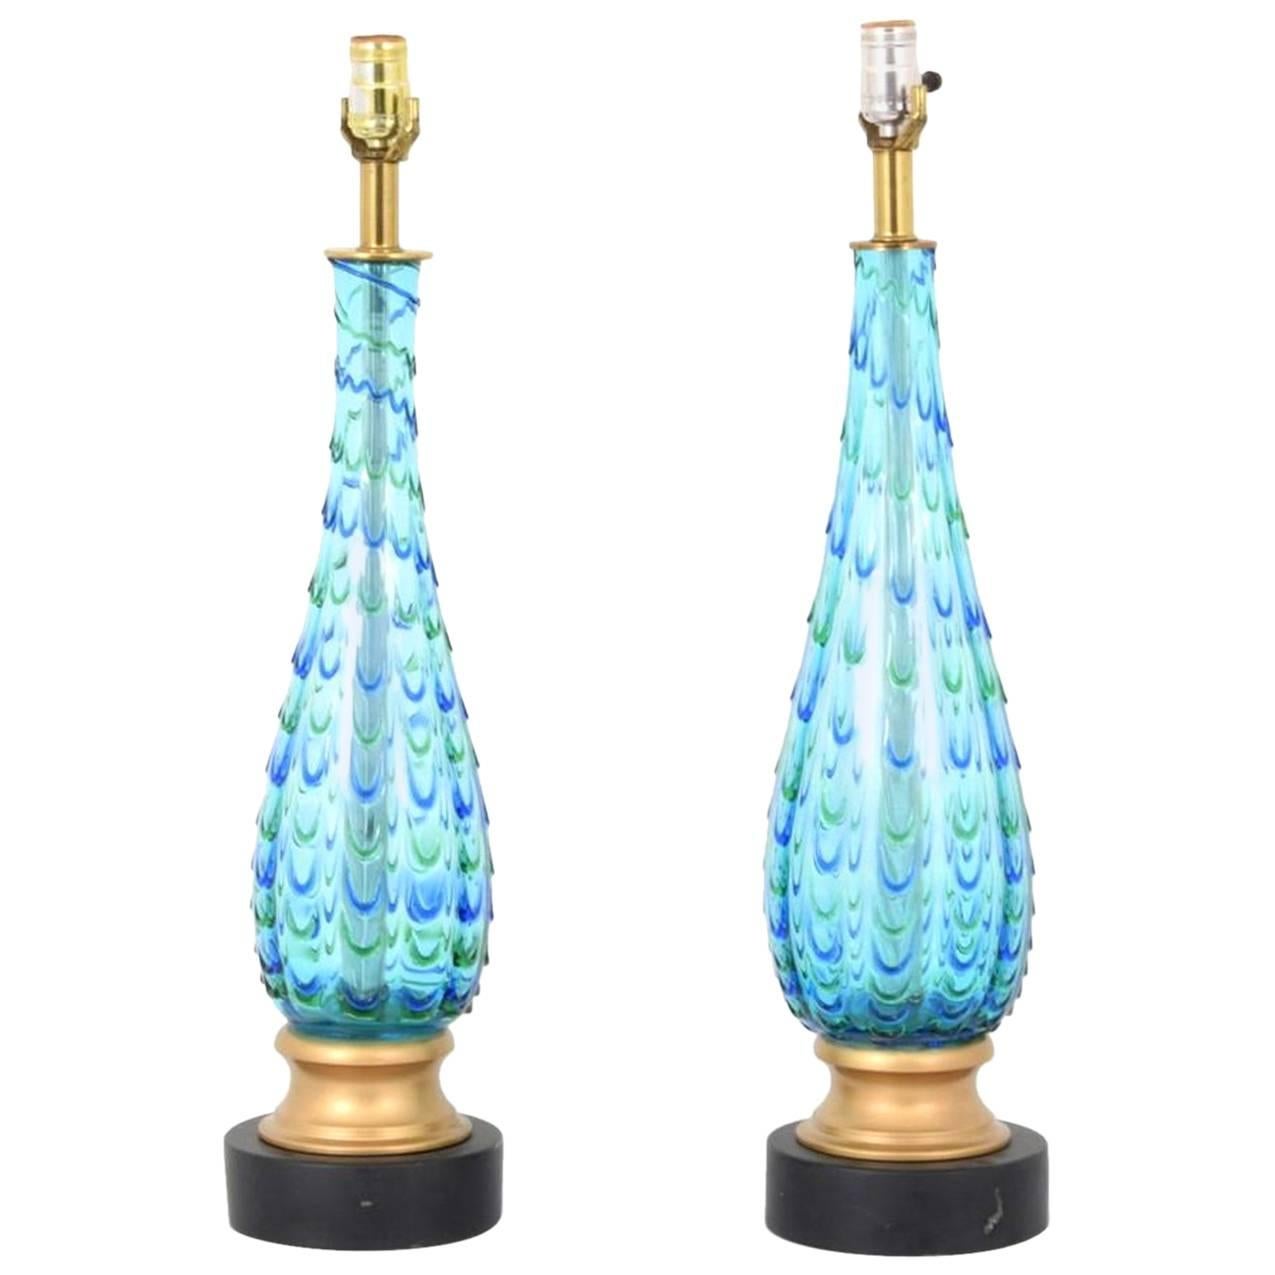 Gorgeous Pair of Marbro Lamp Company Murano Lamps, 1955, Italy